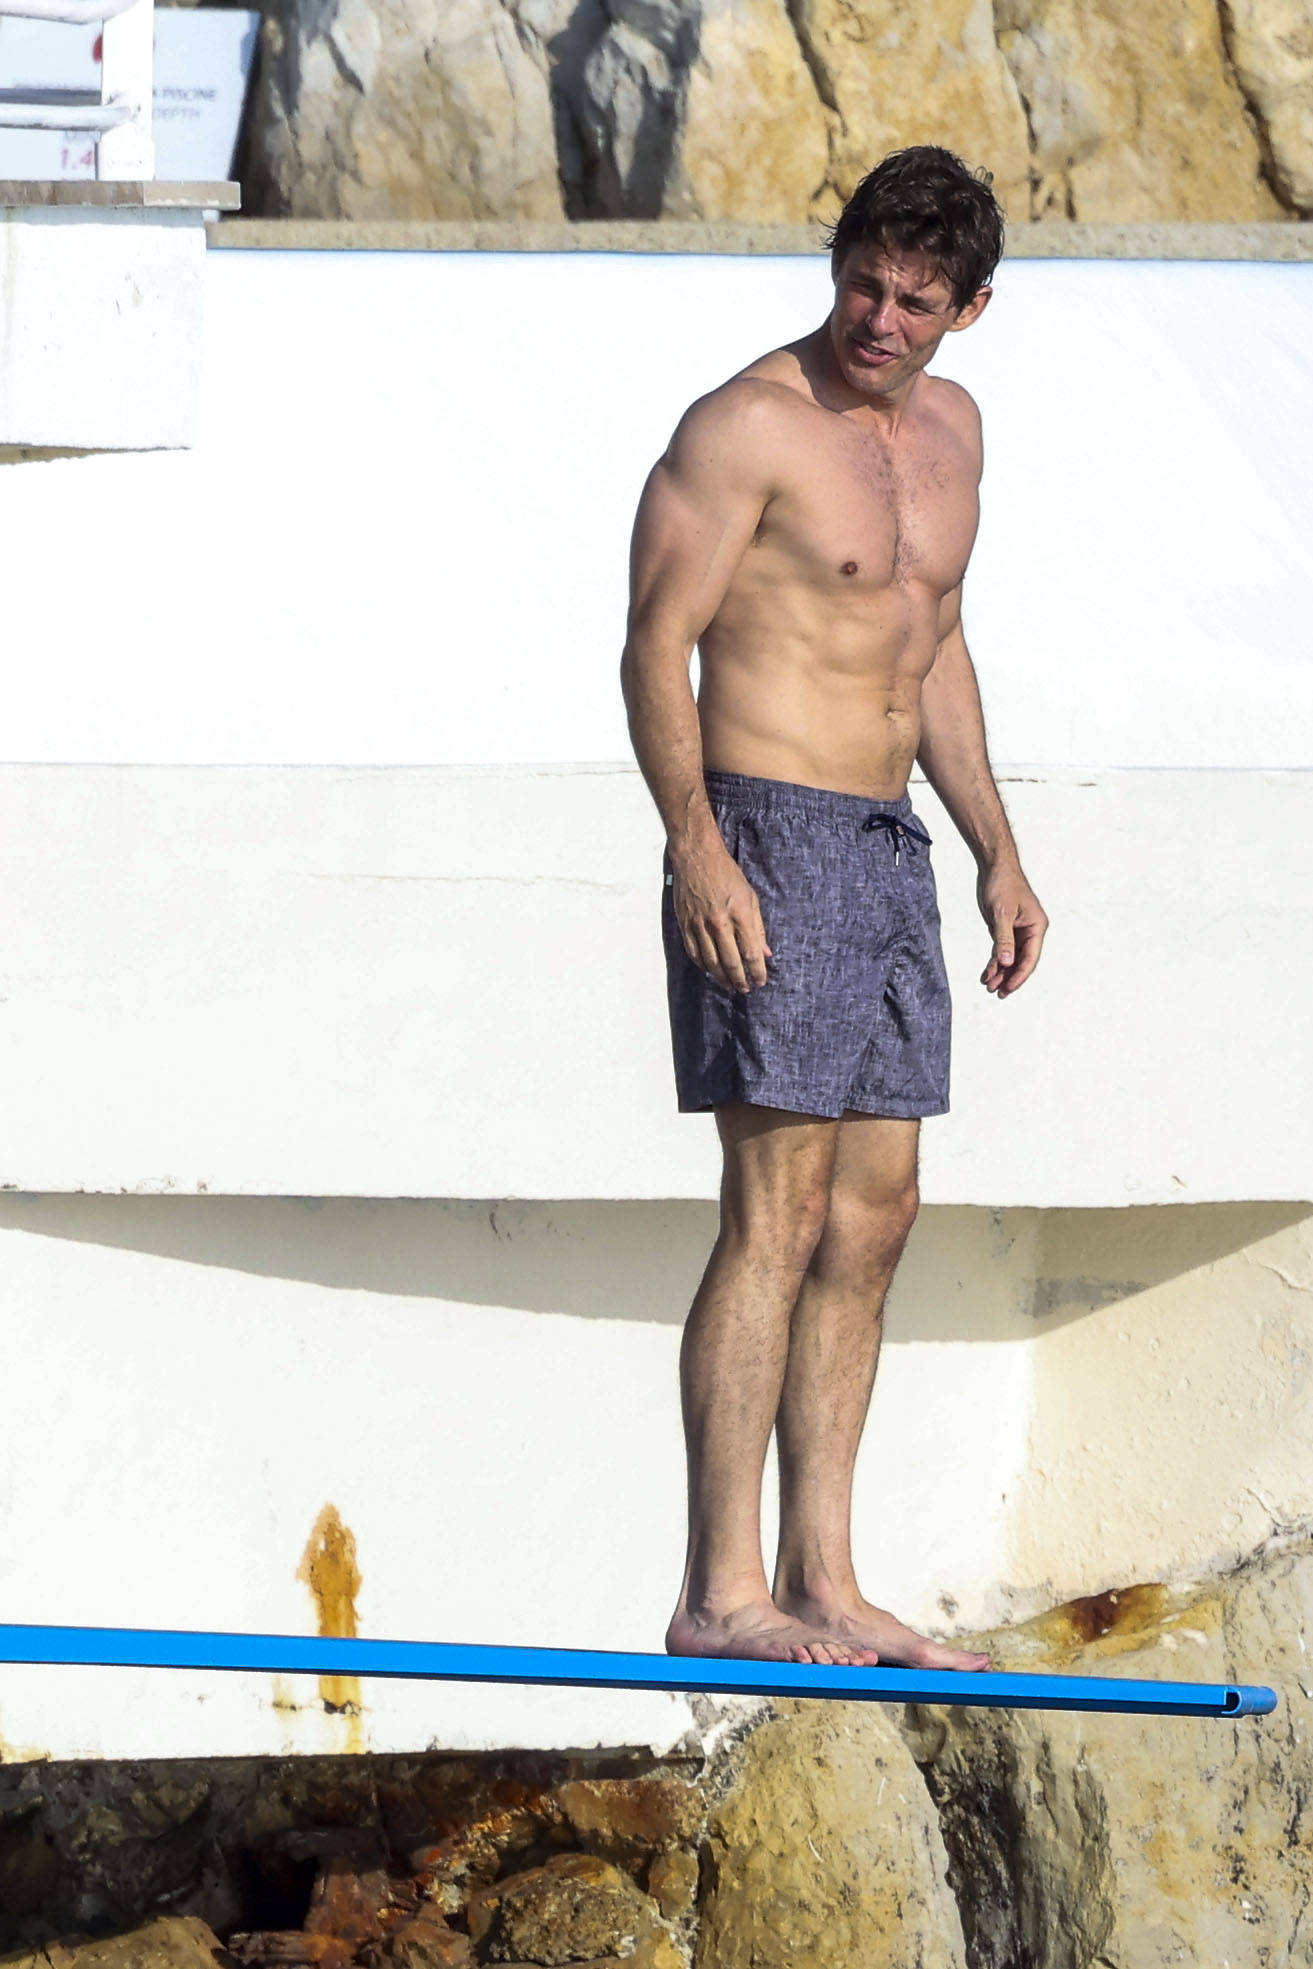 <p><a href="https://www.wonderwall.com/celebrity/christie-brinkley-jennifer-lopez-and-more-ageless-wonders-30657.gallery">Ageless actor</a> James Marsden went for a swim at the Hotel du Cap-Eden-Roc in Antibes, France, on May 27.</p>